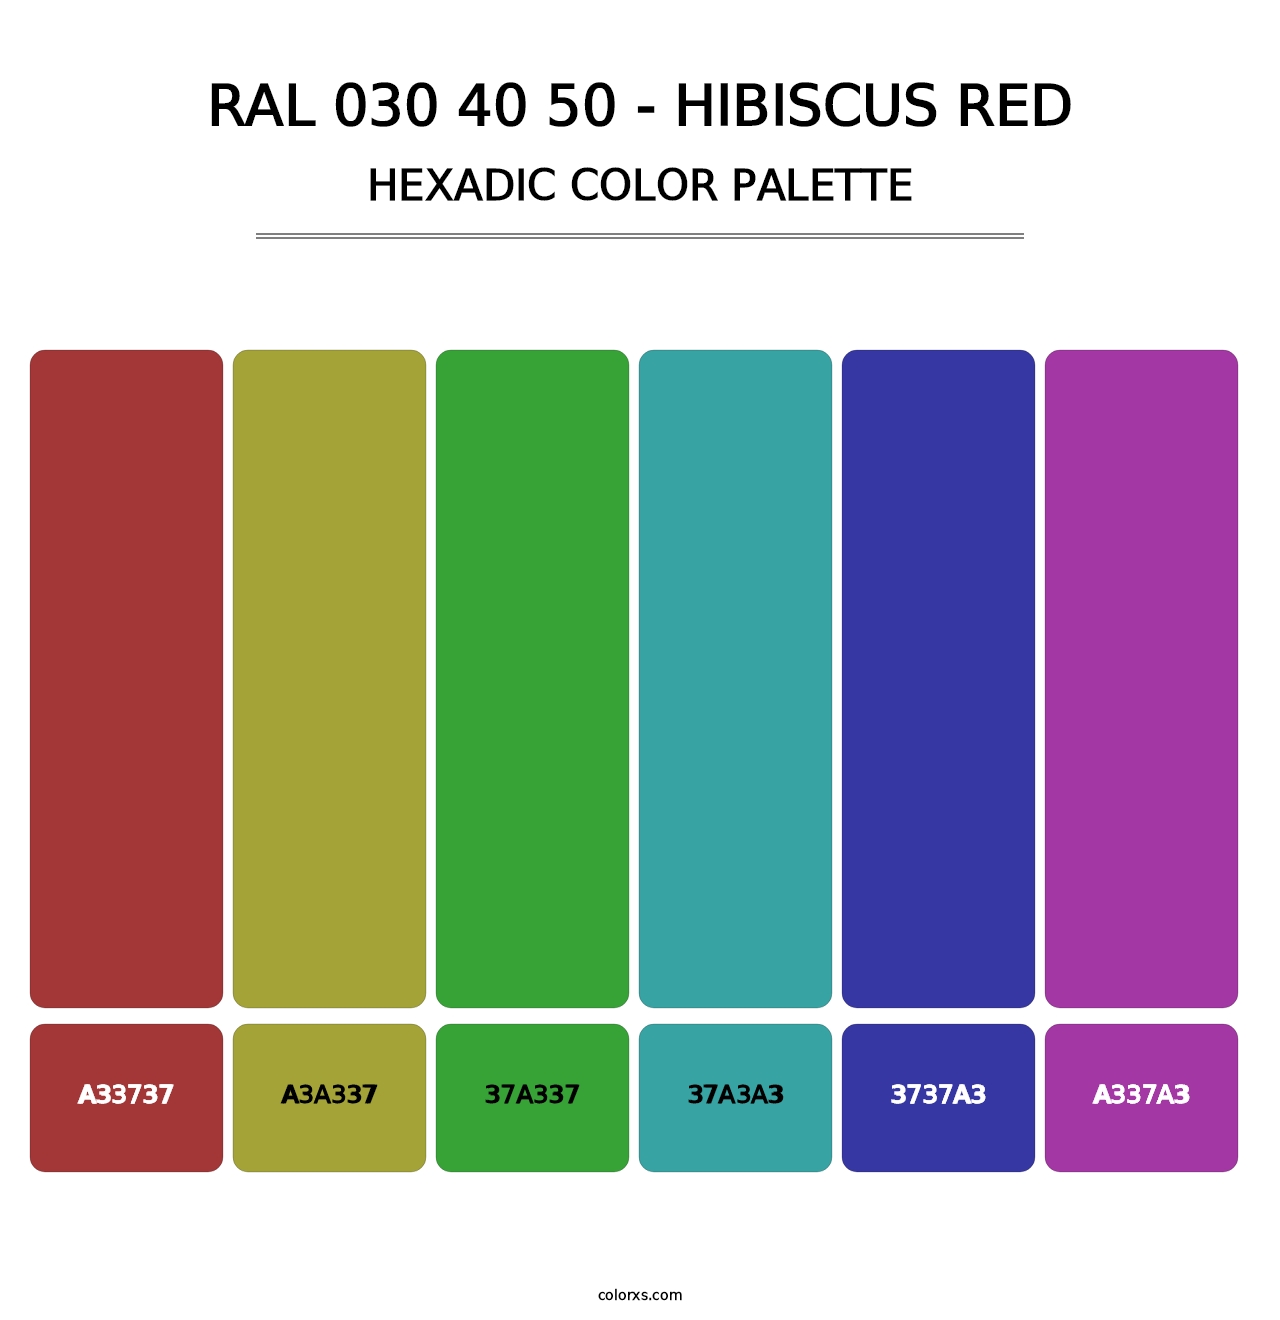 RAL 030 40 50 - Hibiscus Red - Hexadic Color Palette